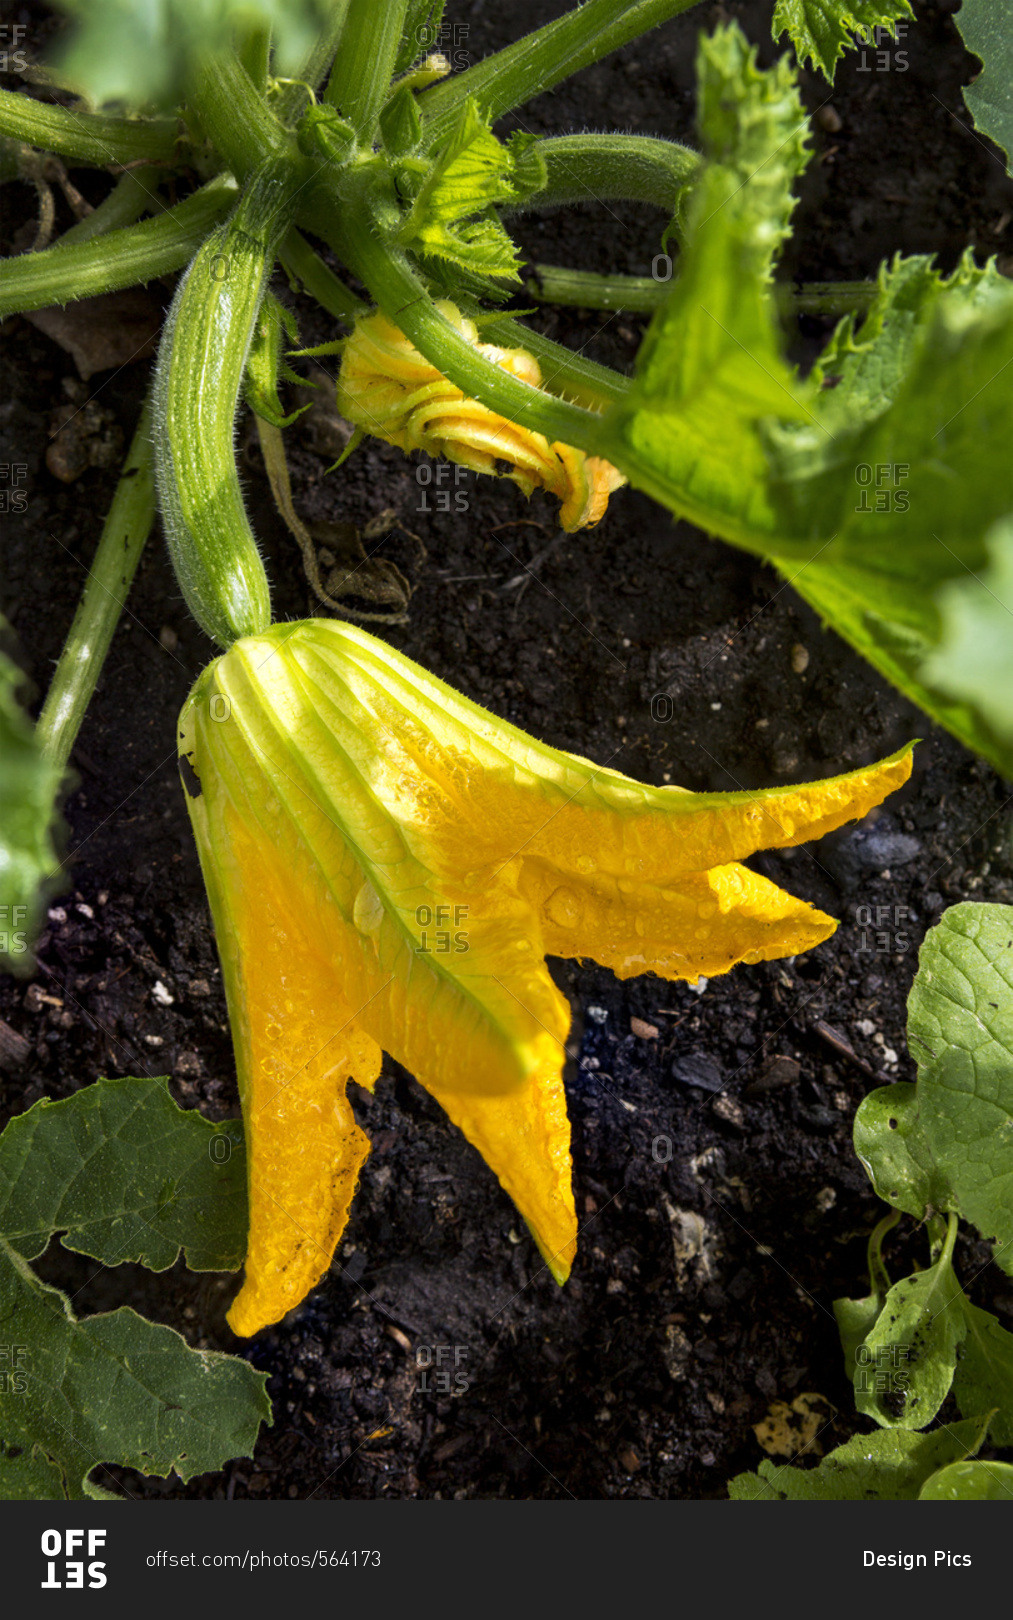 Close up of a large zucchini blossom with a small zucchini on the plant in the soil, Calgary, Alberta, Canada